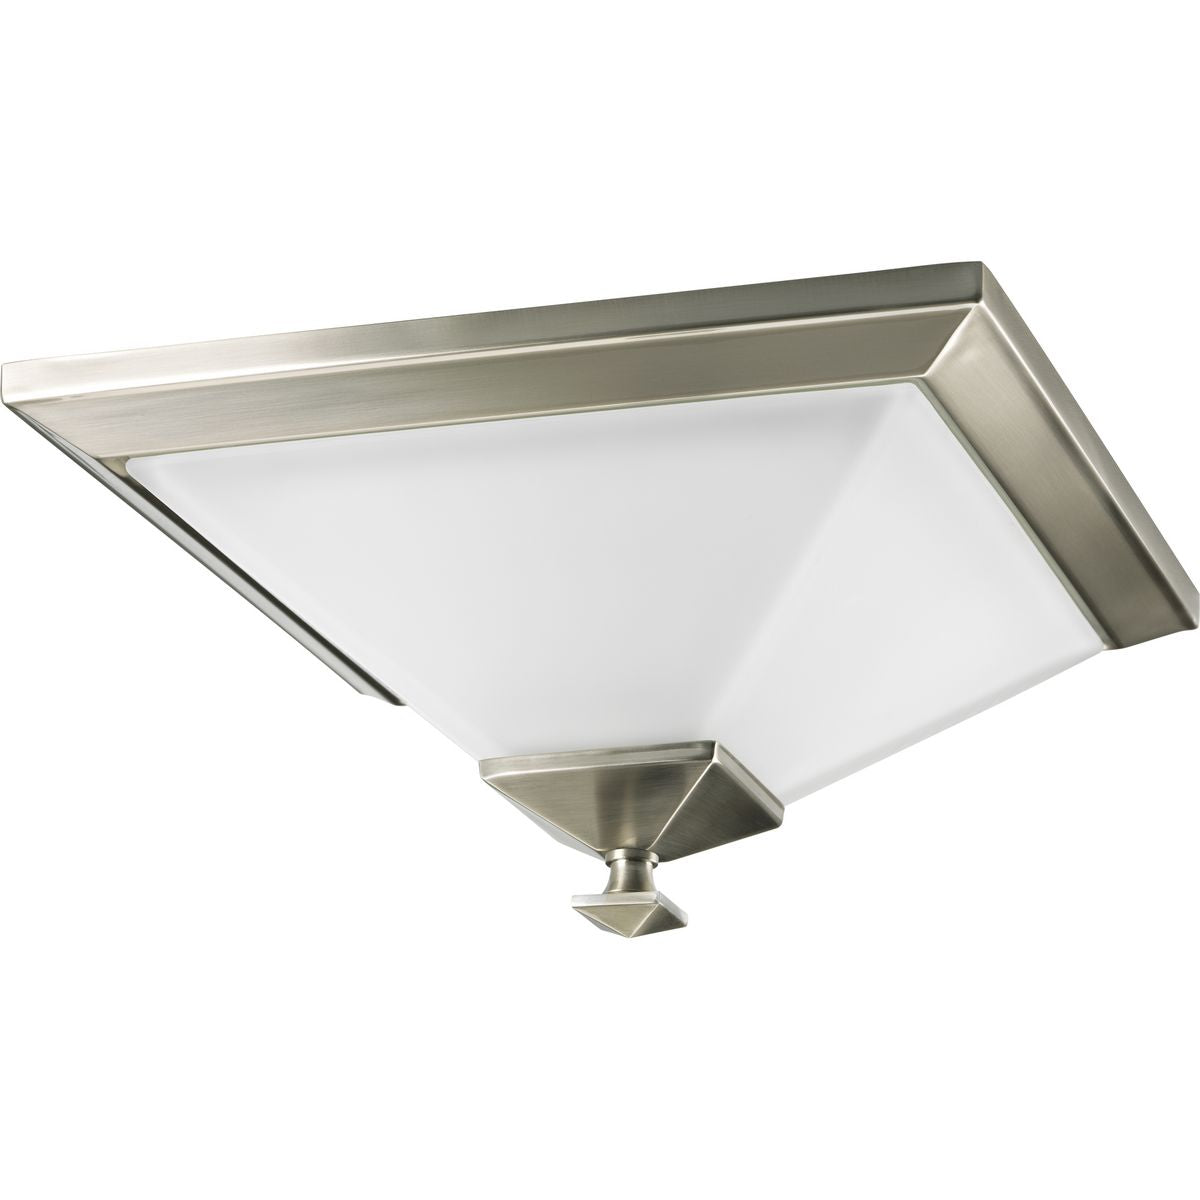 PROGRESS LIGHTING P3854-09 Brushed Nickel Clifton Heights Collection Brushed Nickel One-Light 12-1/2" Flush Mount